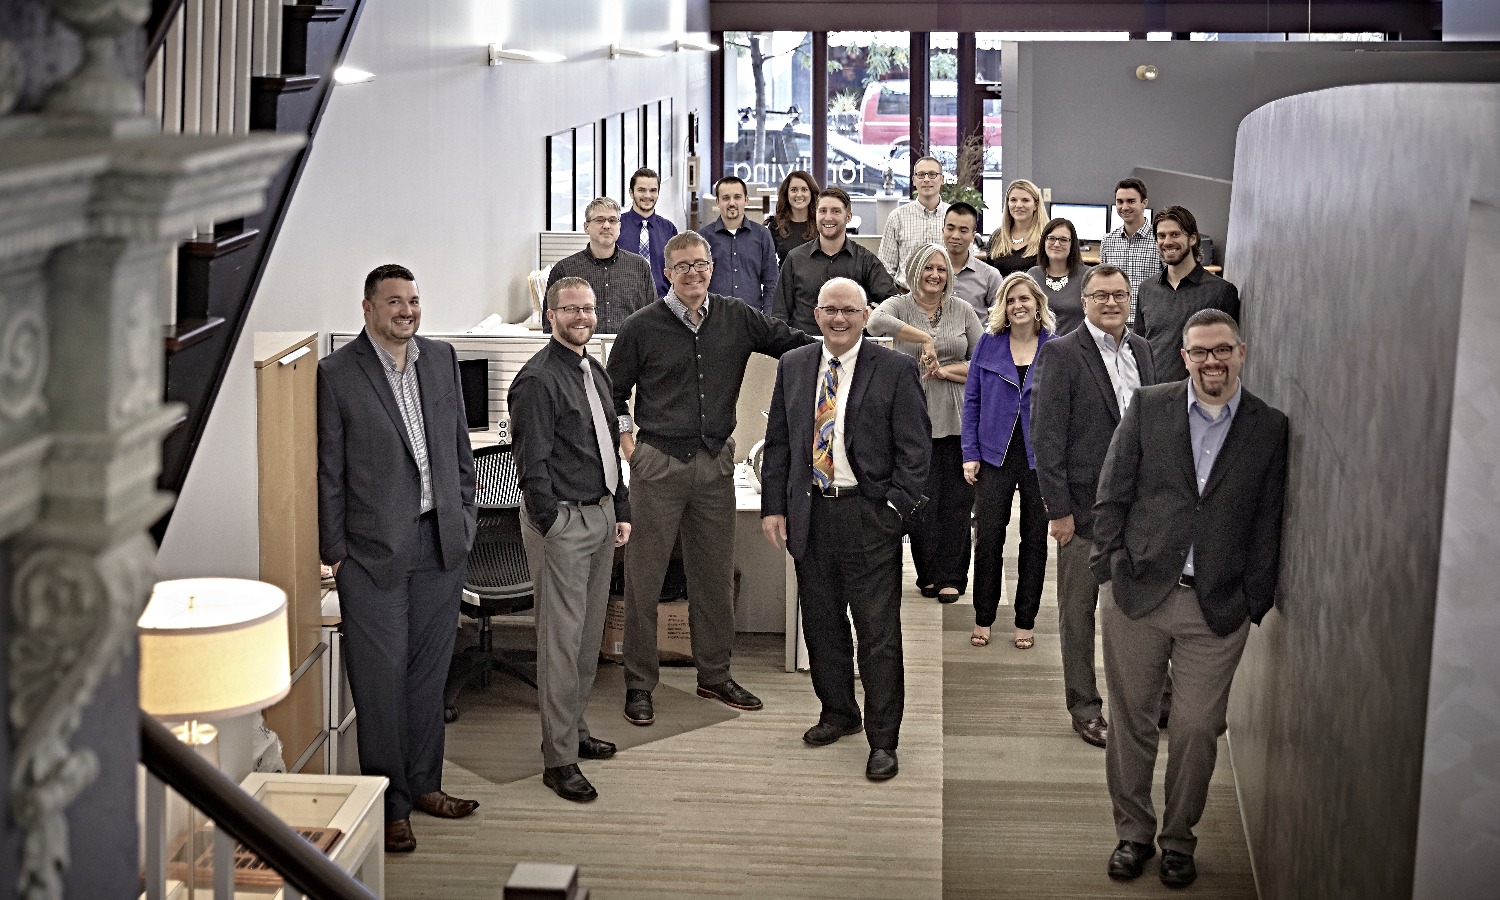 Staff photo at Architectural Firms